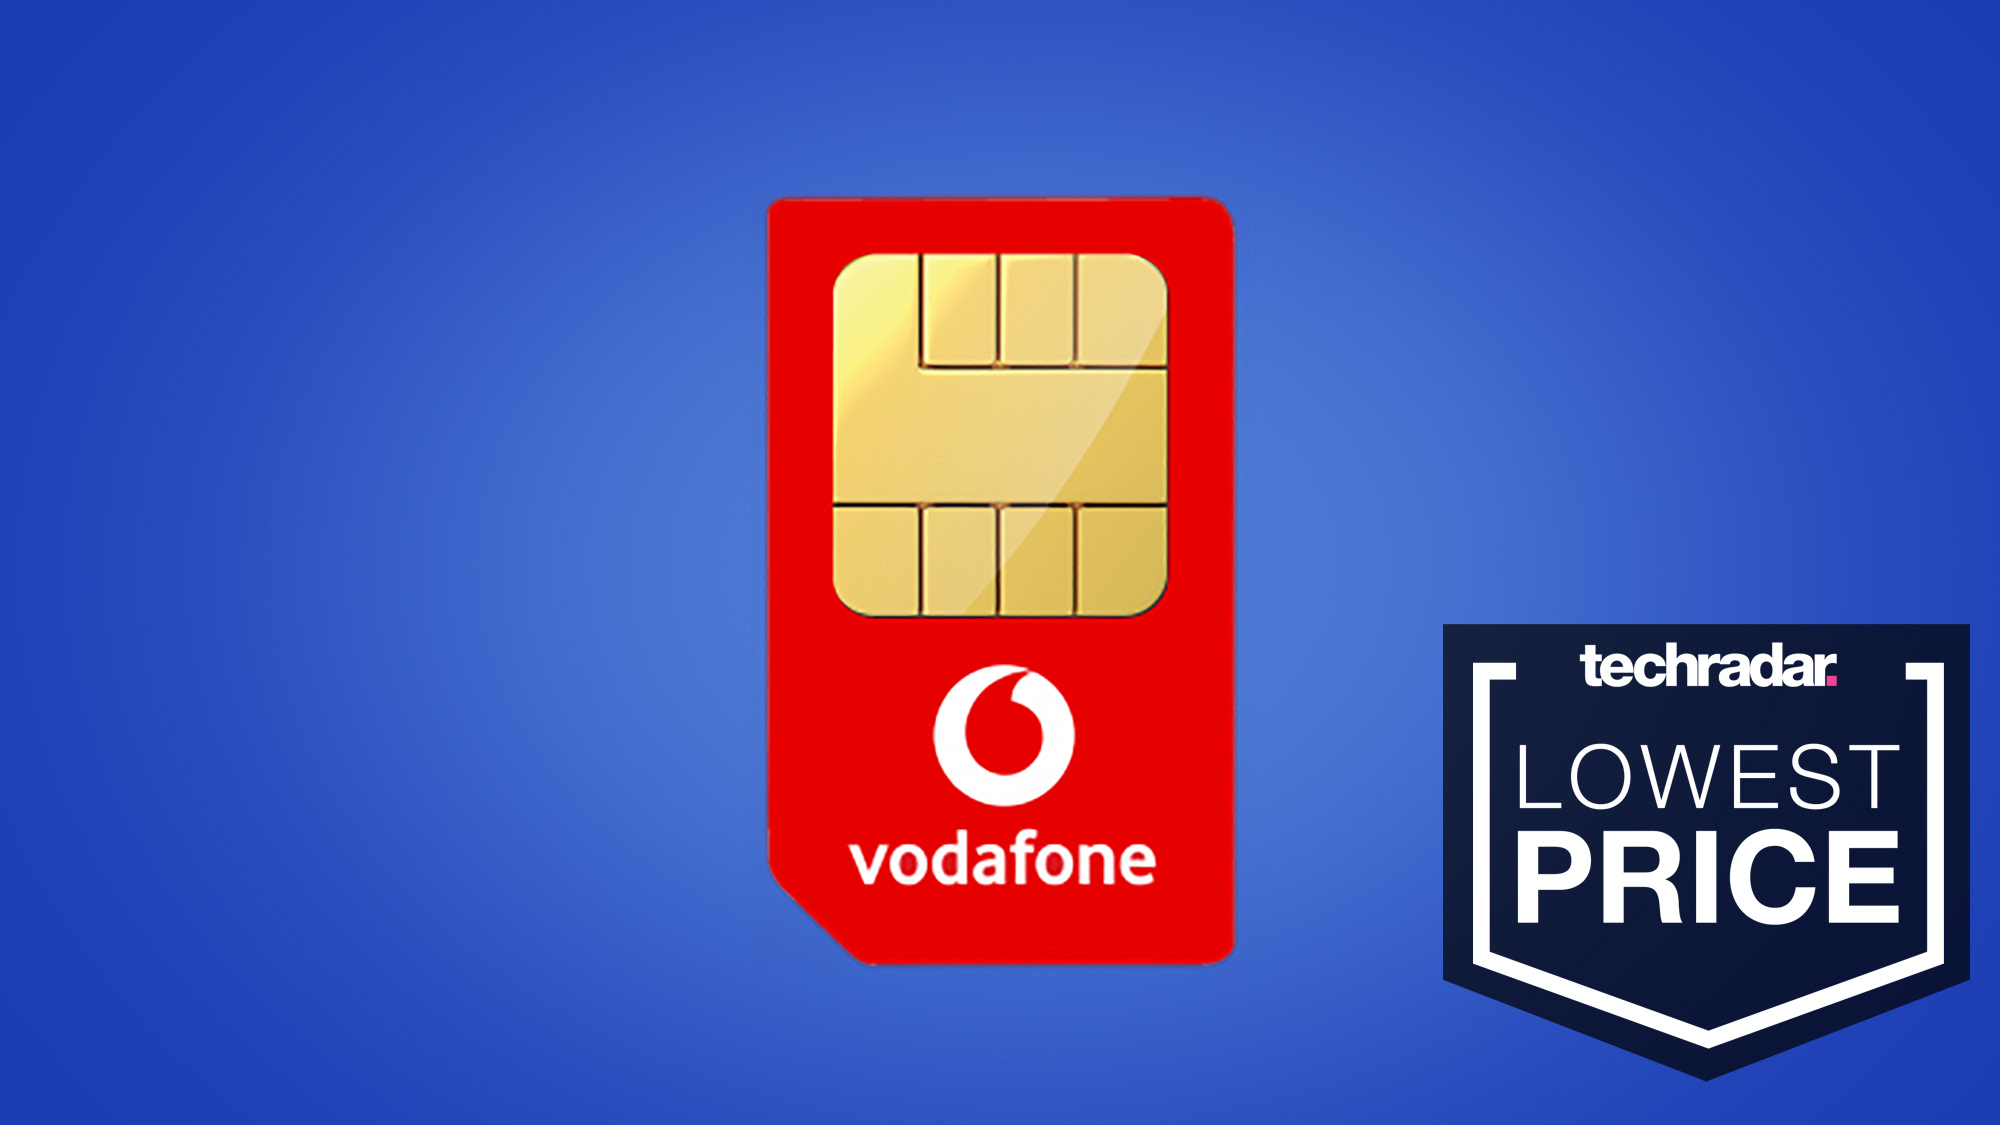 Get the cheapest 100GB SIM-only deal around for just £8.50 with Vodafone